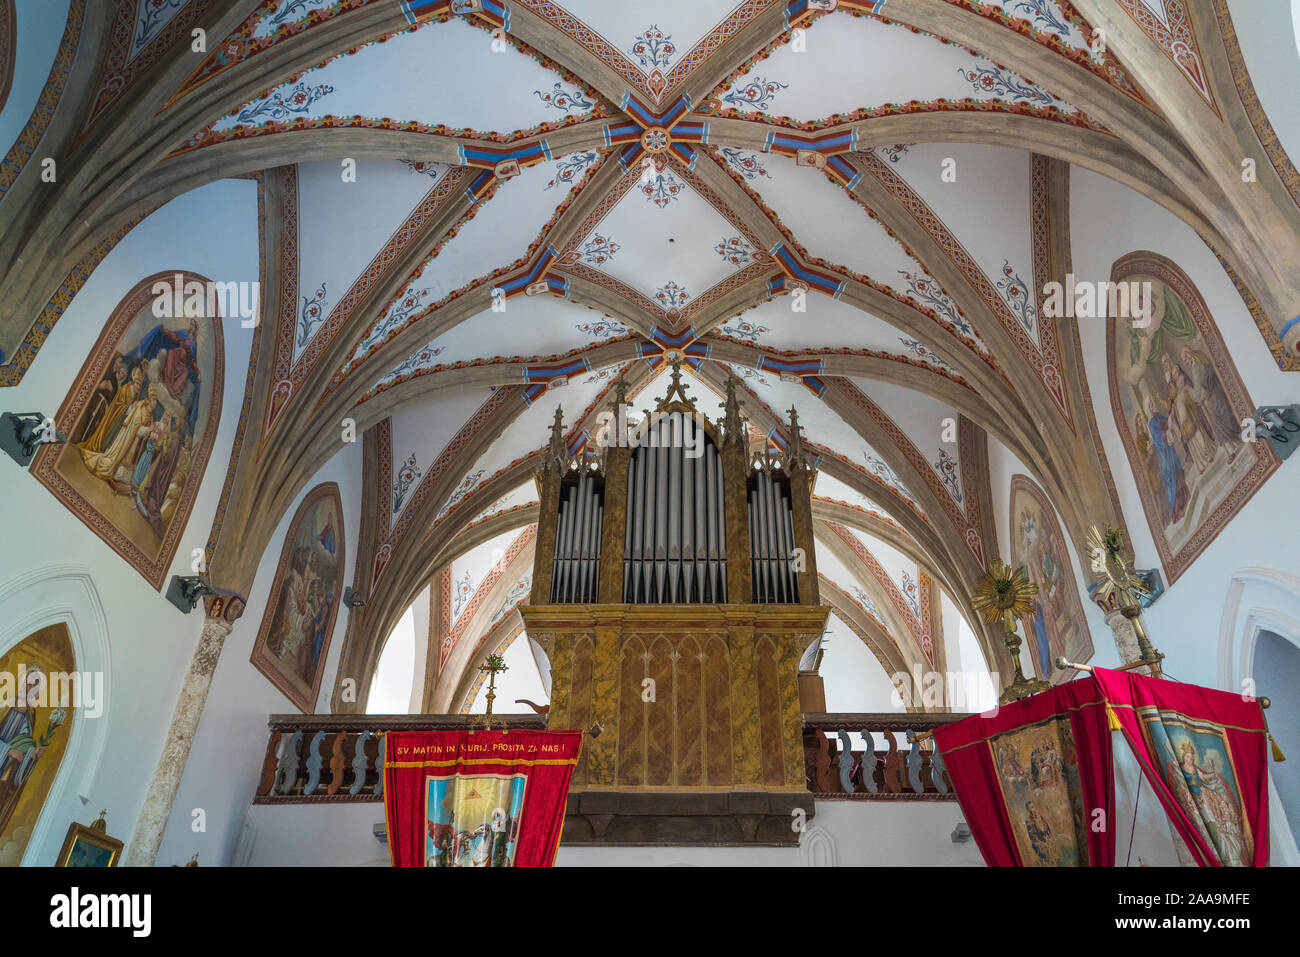 Interior architecture of the Church of St. Mary of the Snows in Solcava, Slovenia, Europe. Stock Photo